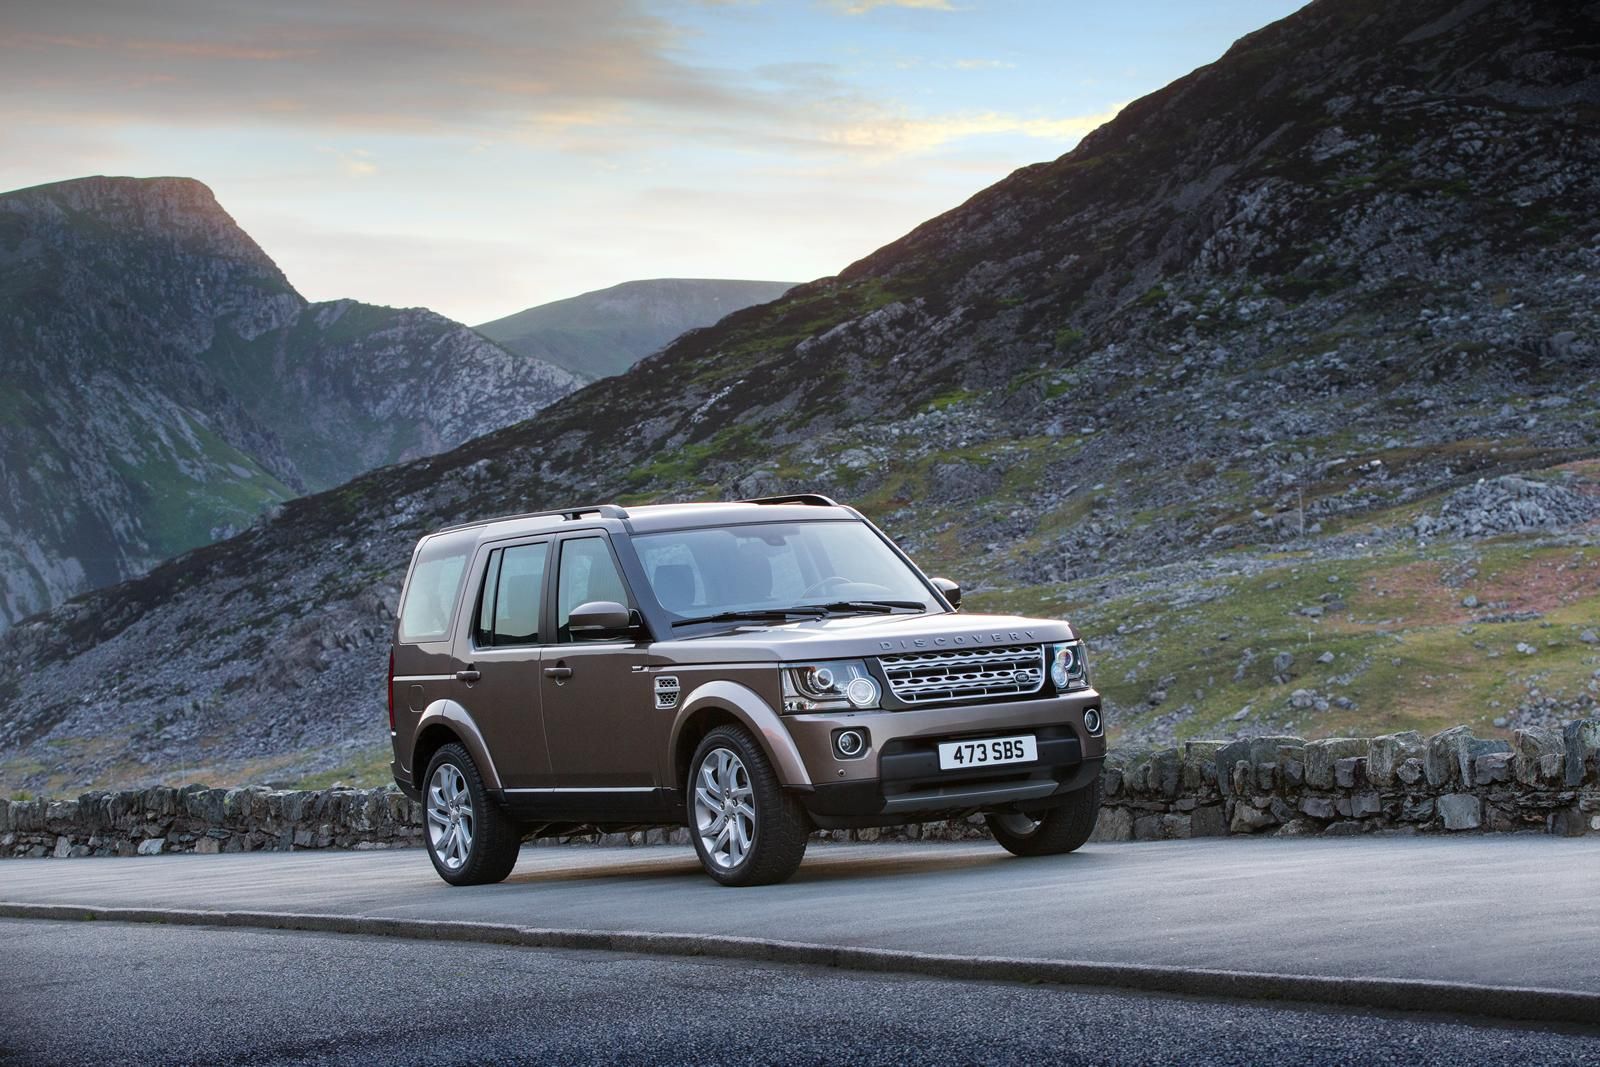 2015 LAND ROVER DSCOVERY RESM GALERS